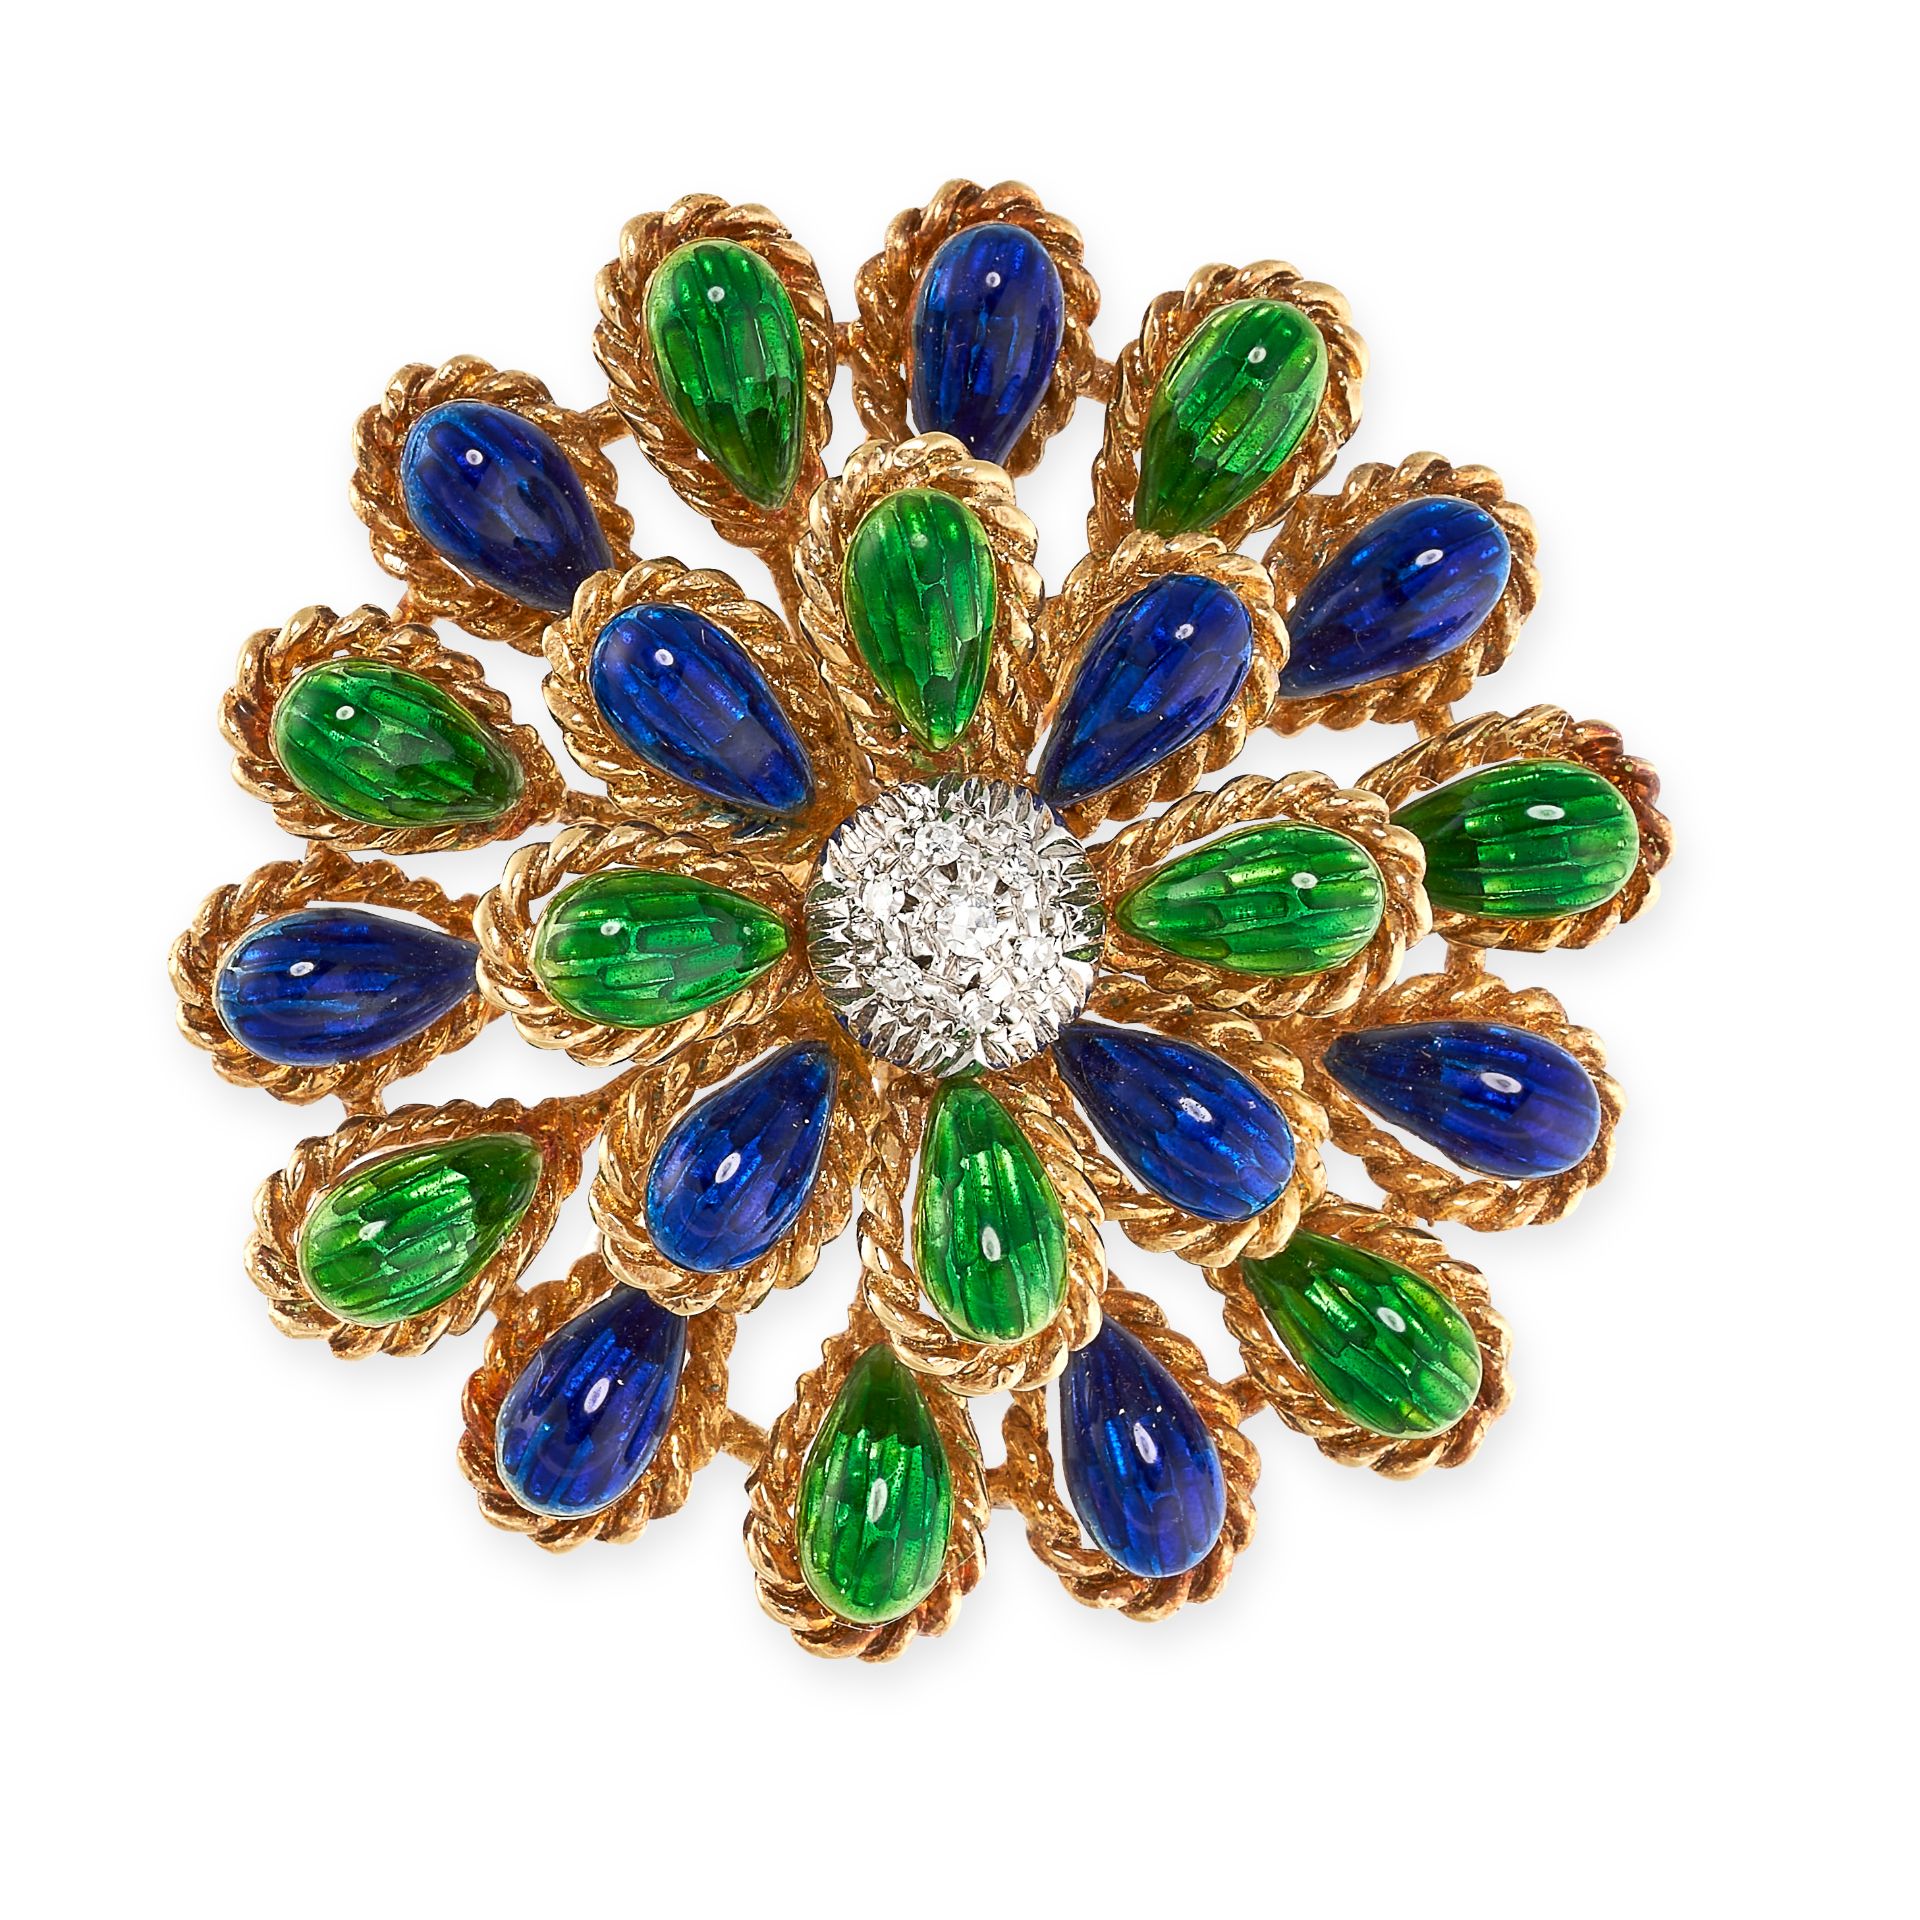 NO RESERVE - A DIAMOND AND ENAMEL BROOCH  Made in 18 carat yellow gold, designed as a flower, the